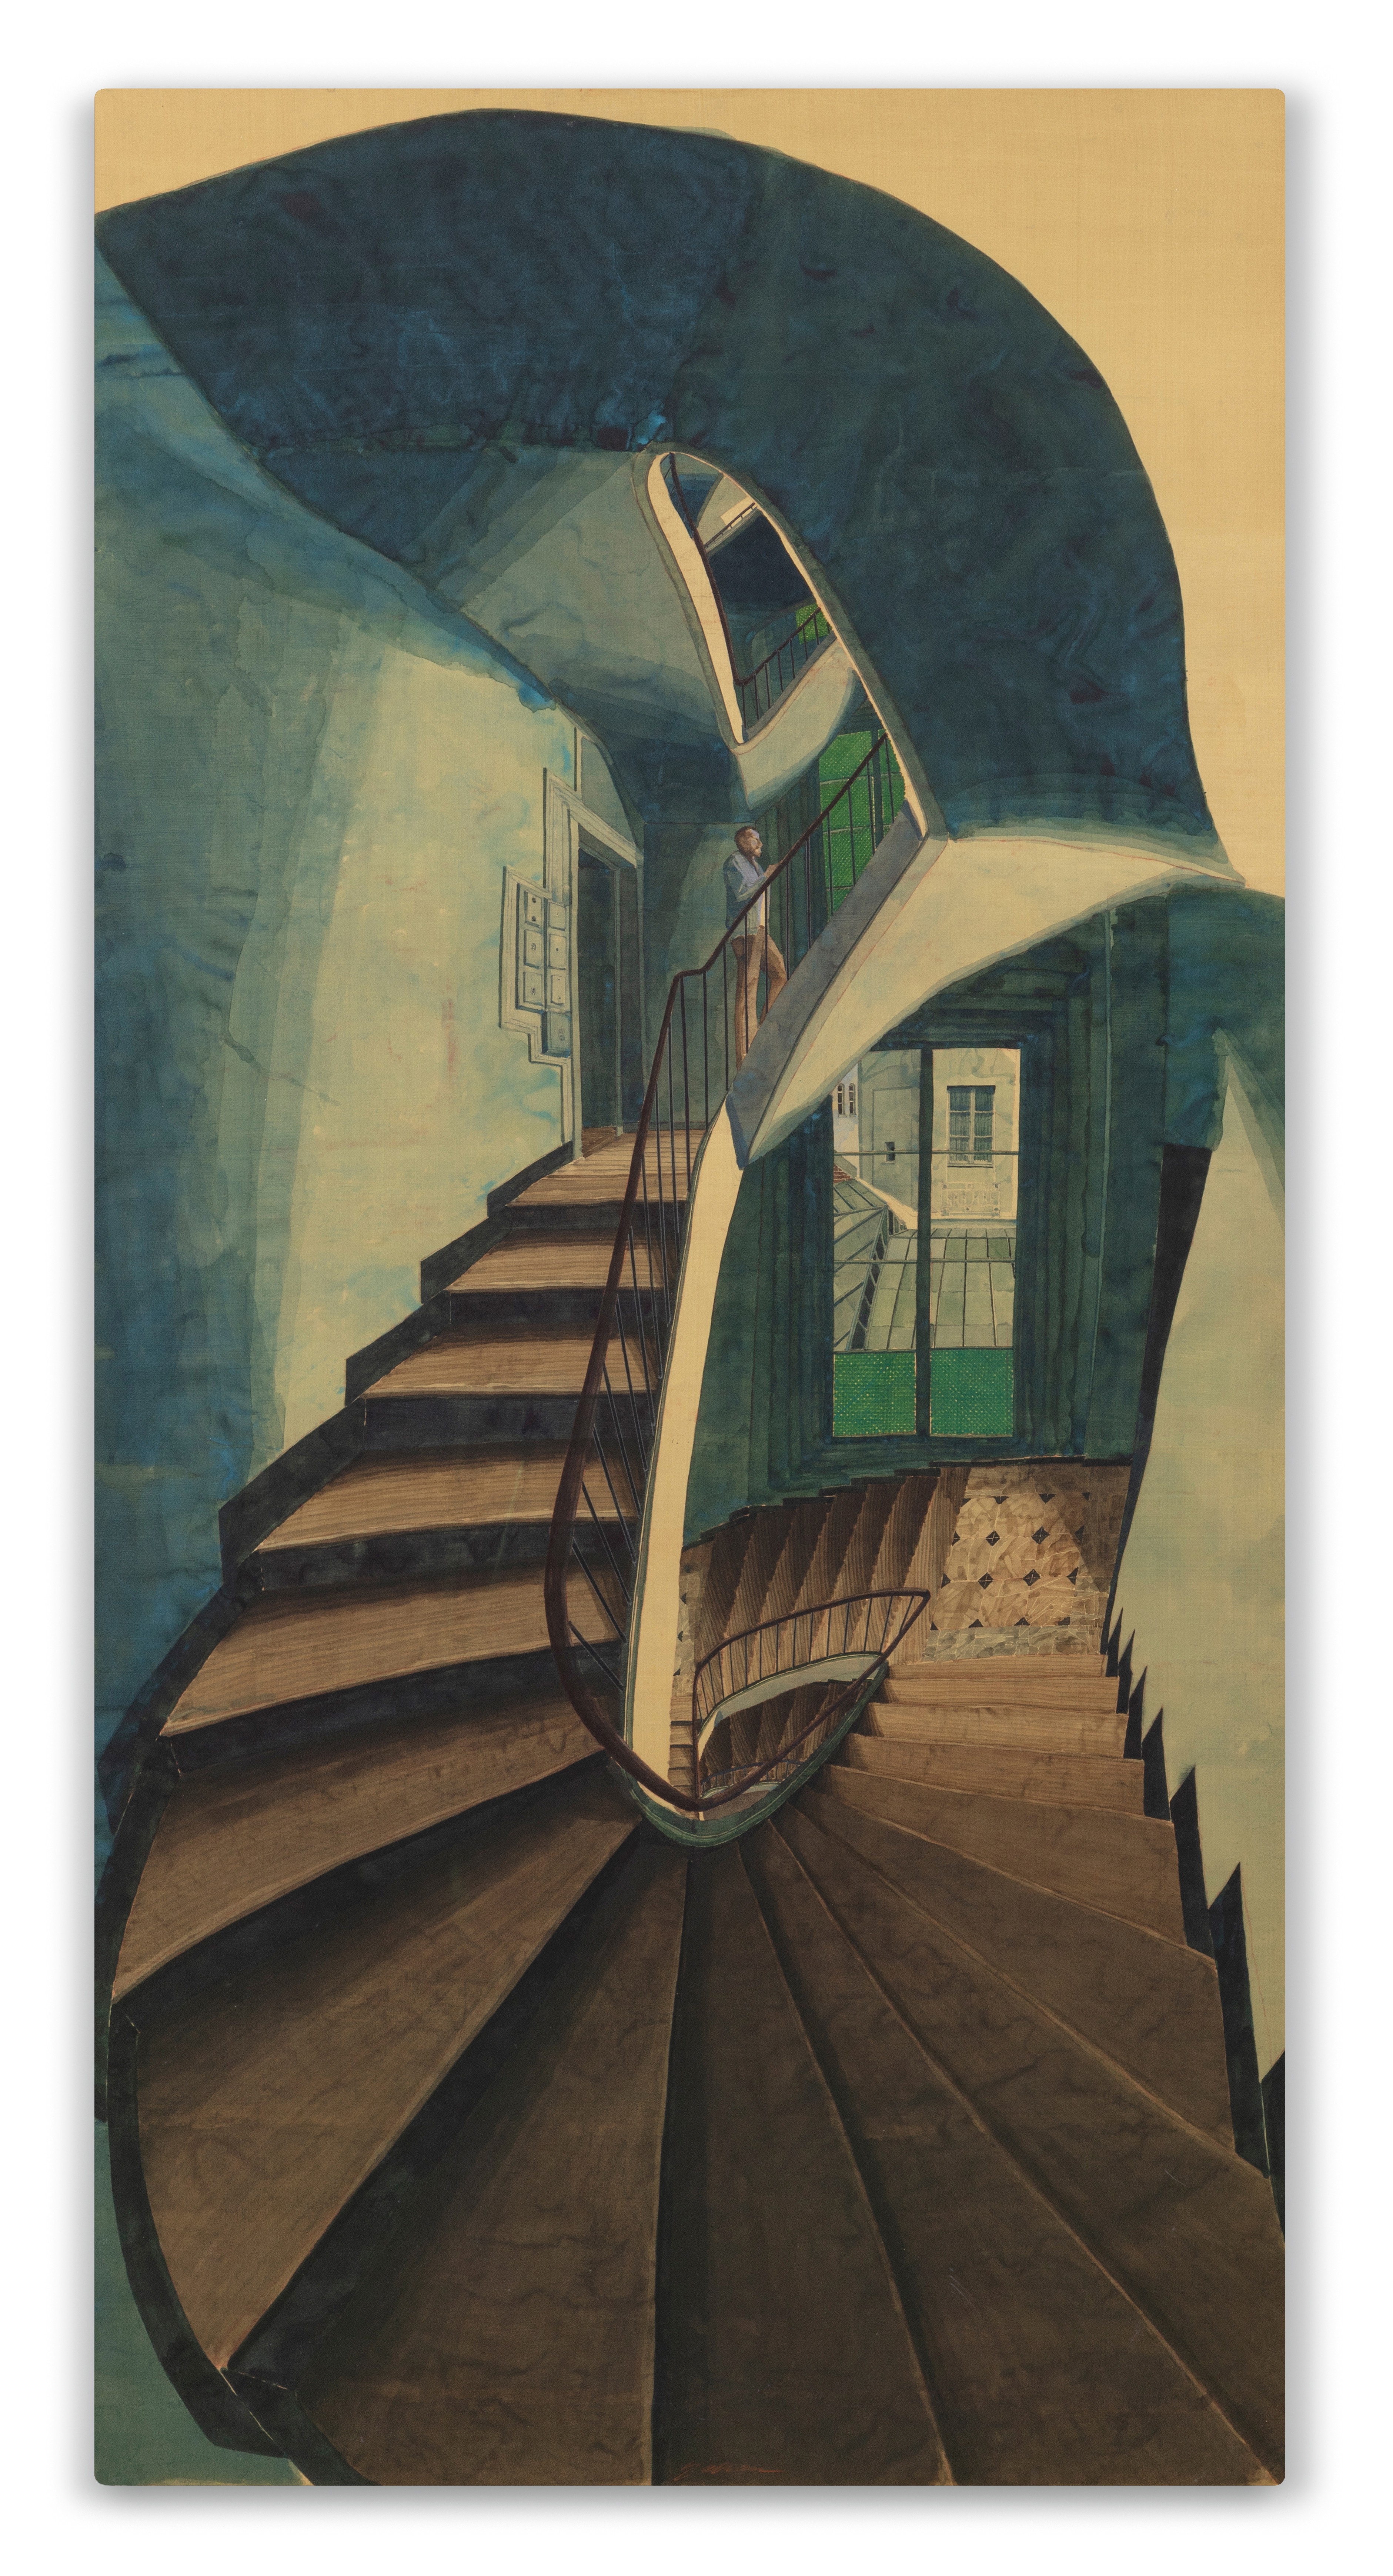 L'escalier by Sam Szafran, Executed in 1992